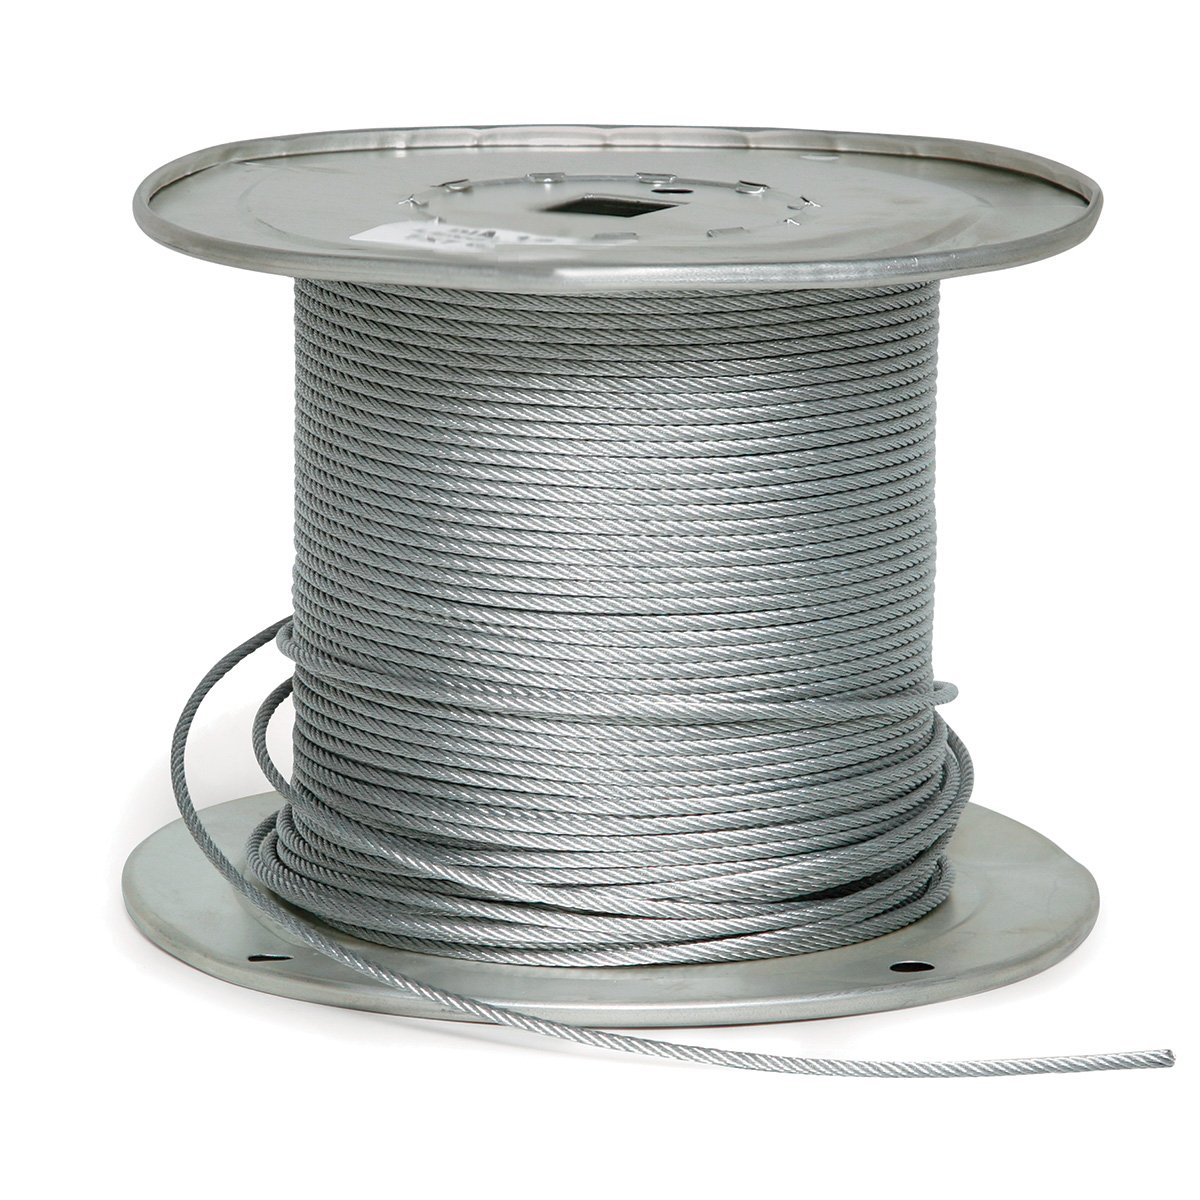 2g9187-00250 0.18 Dia. X 250 Ft. 7 X 19 Galvanized Aircraft Cable